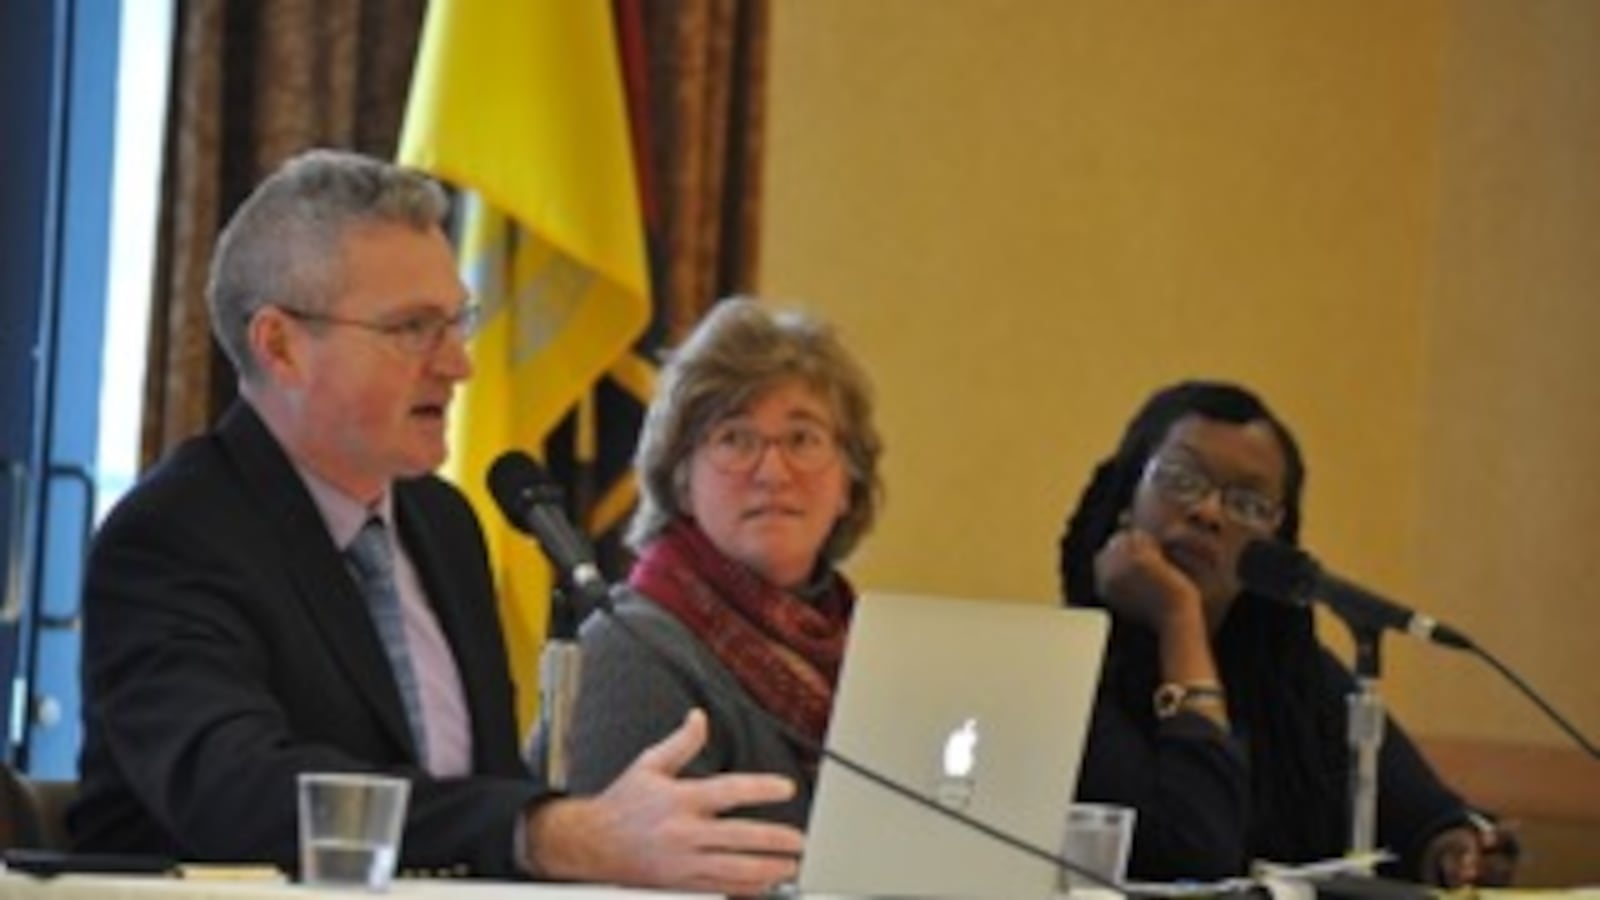 At a panel discussion at the University of Colorado Boulder. From left: Raegen Miller, Teach For America; Jennie Whitcomb, University of Colorado; Terrenda White, University of Colorado